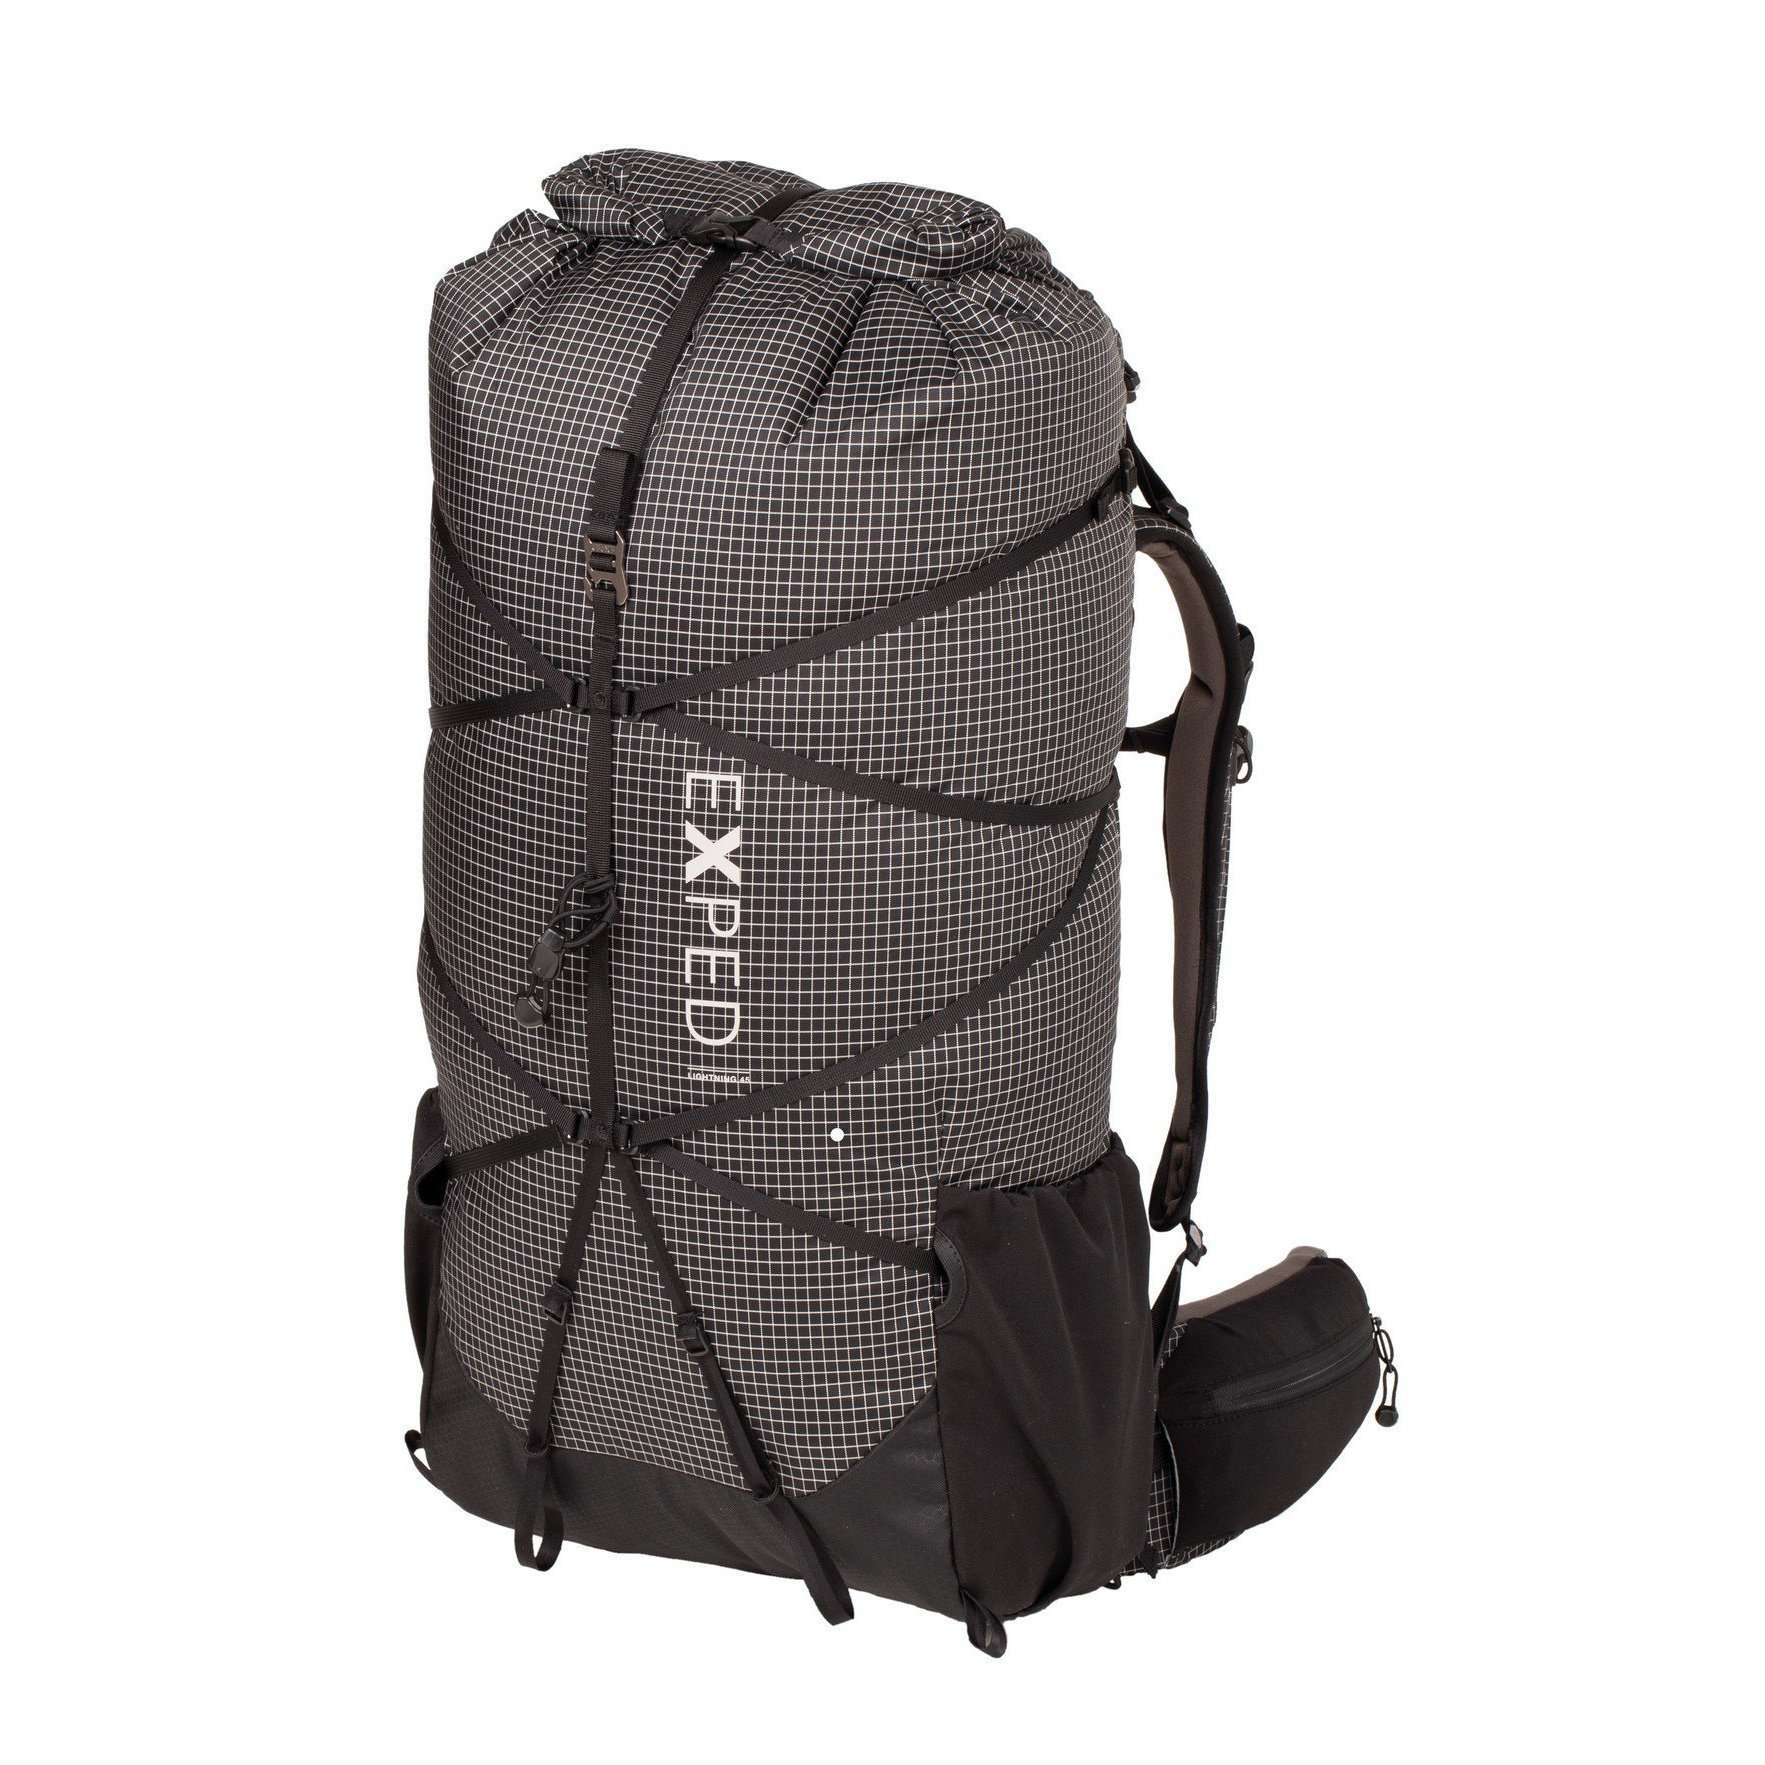 Exped, Exped Lightning 45 Litre, Rucksacks/Packs,Wylies Outdoor World,